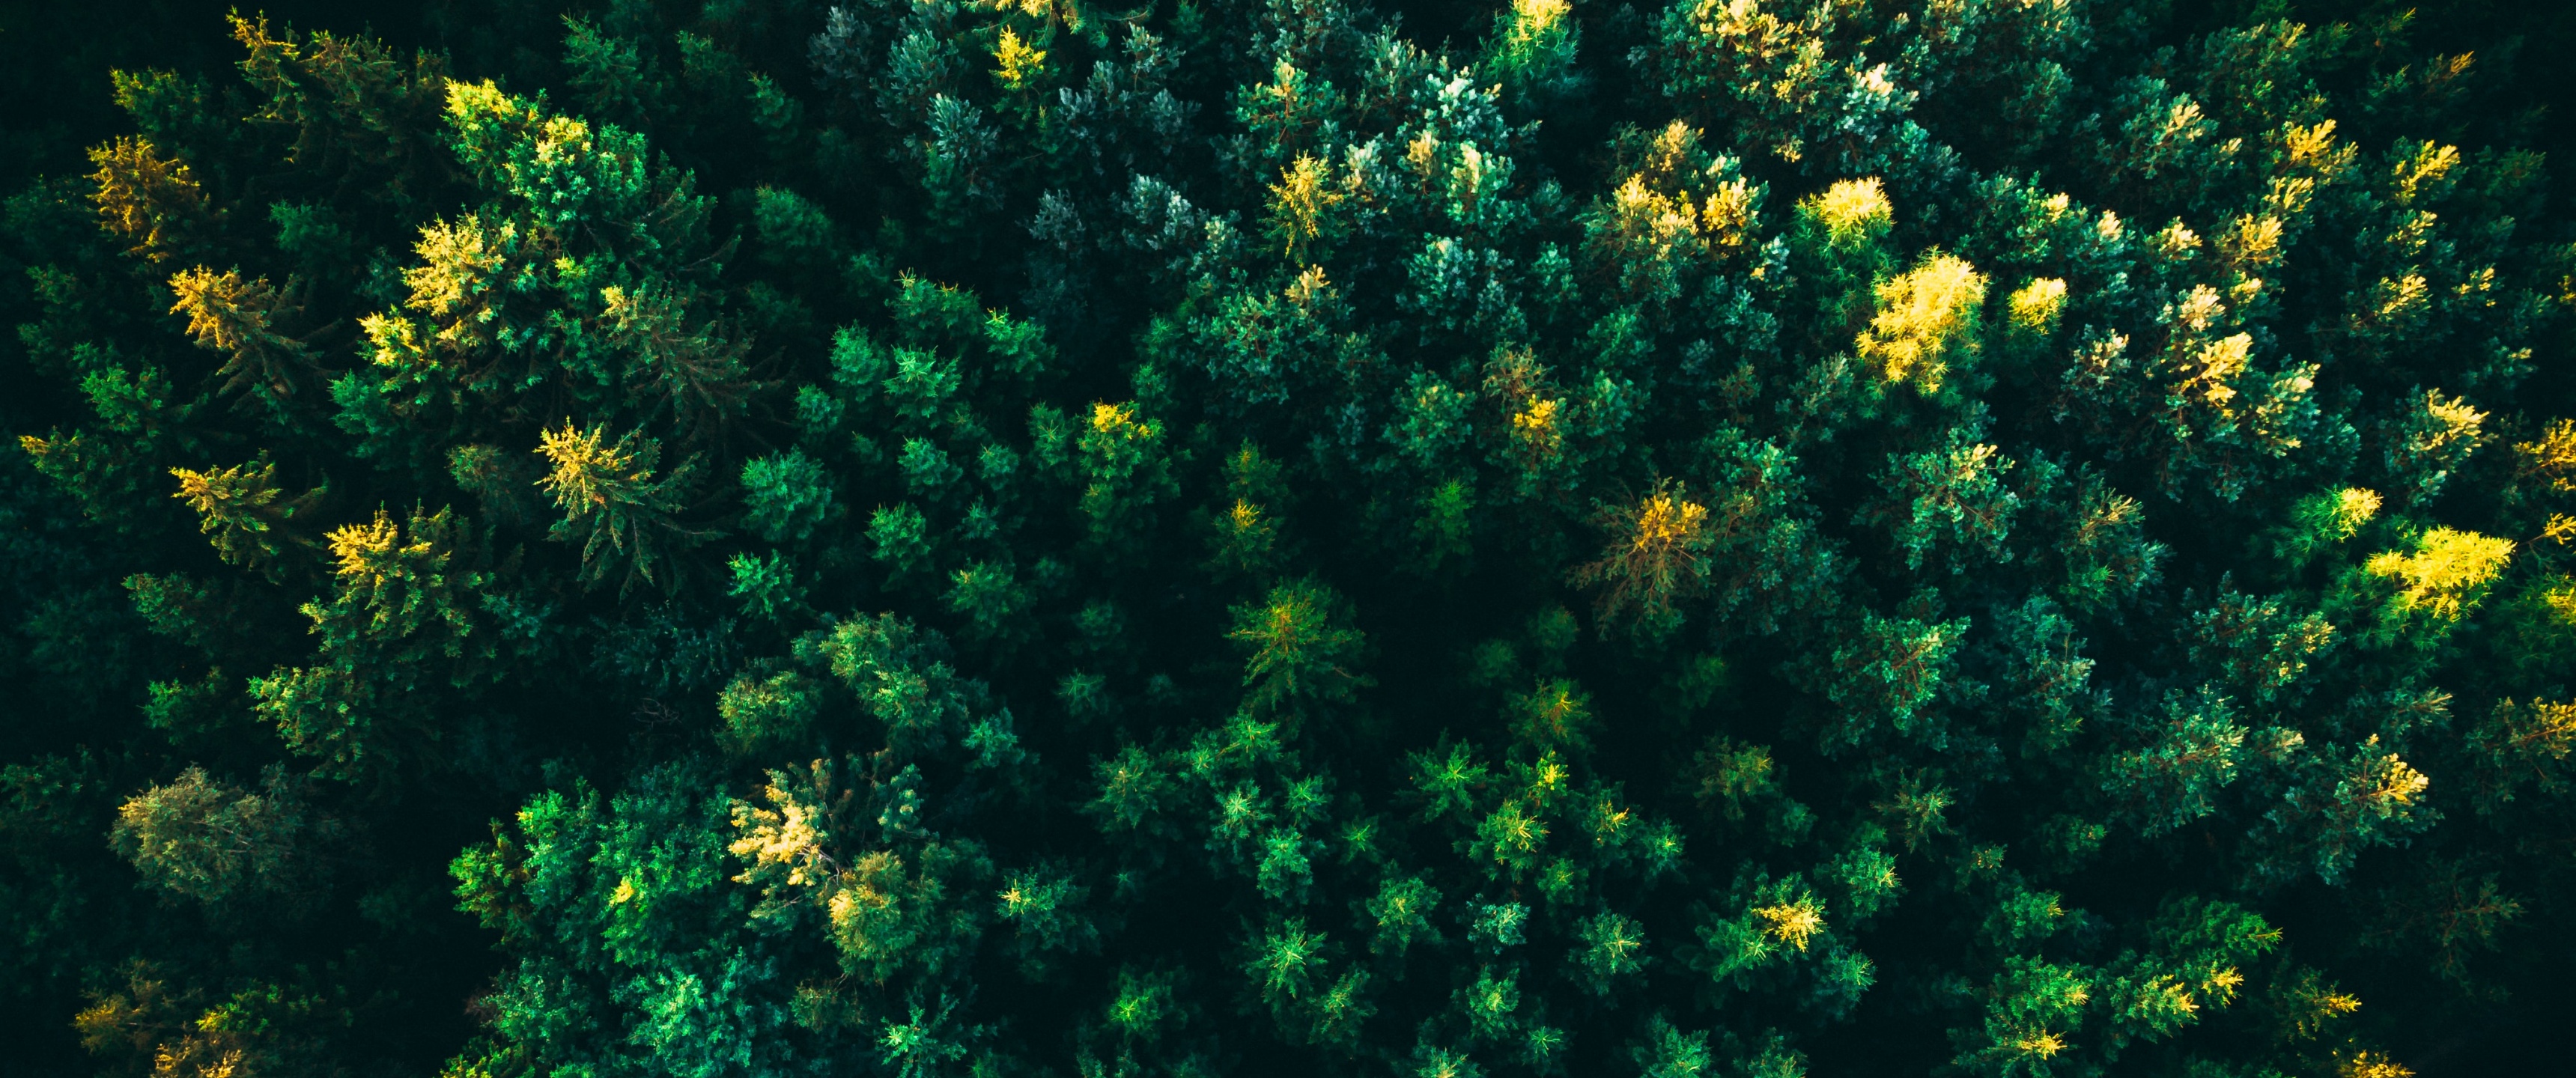 Green Trees Wallpaper 4K, Forest, Aerial view, Greenery, Drone photo, Nature